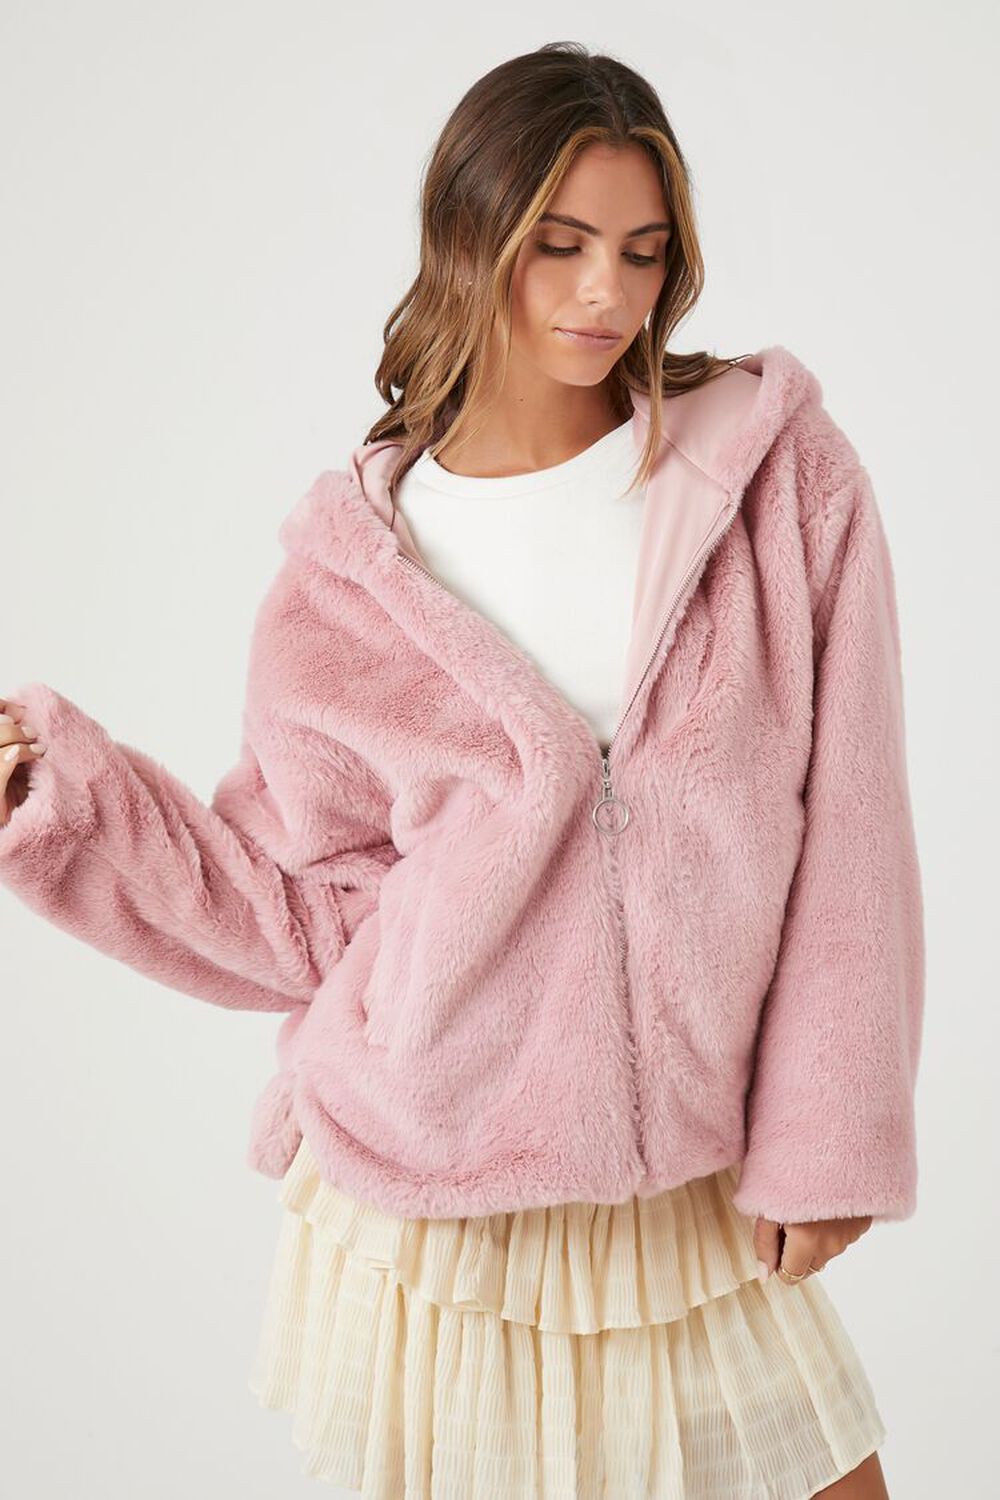 A woman wearing a Pale Mauve Forever 21 Plush Faux Fur Zip-Up Hoodie with a white sweater and a cream-colored skirt